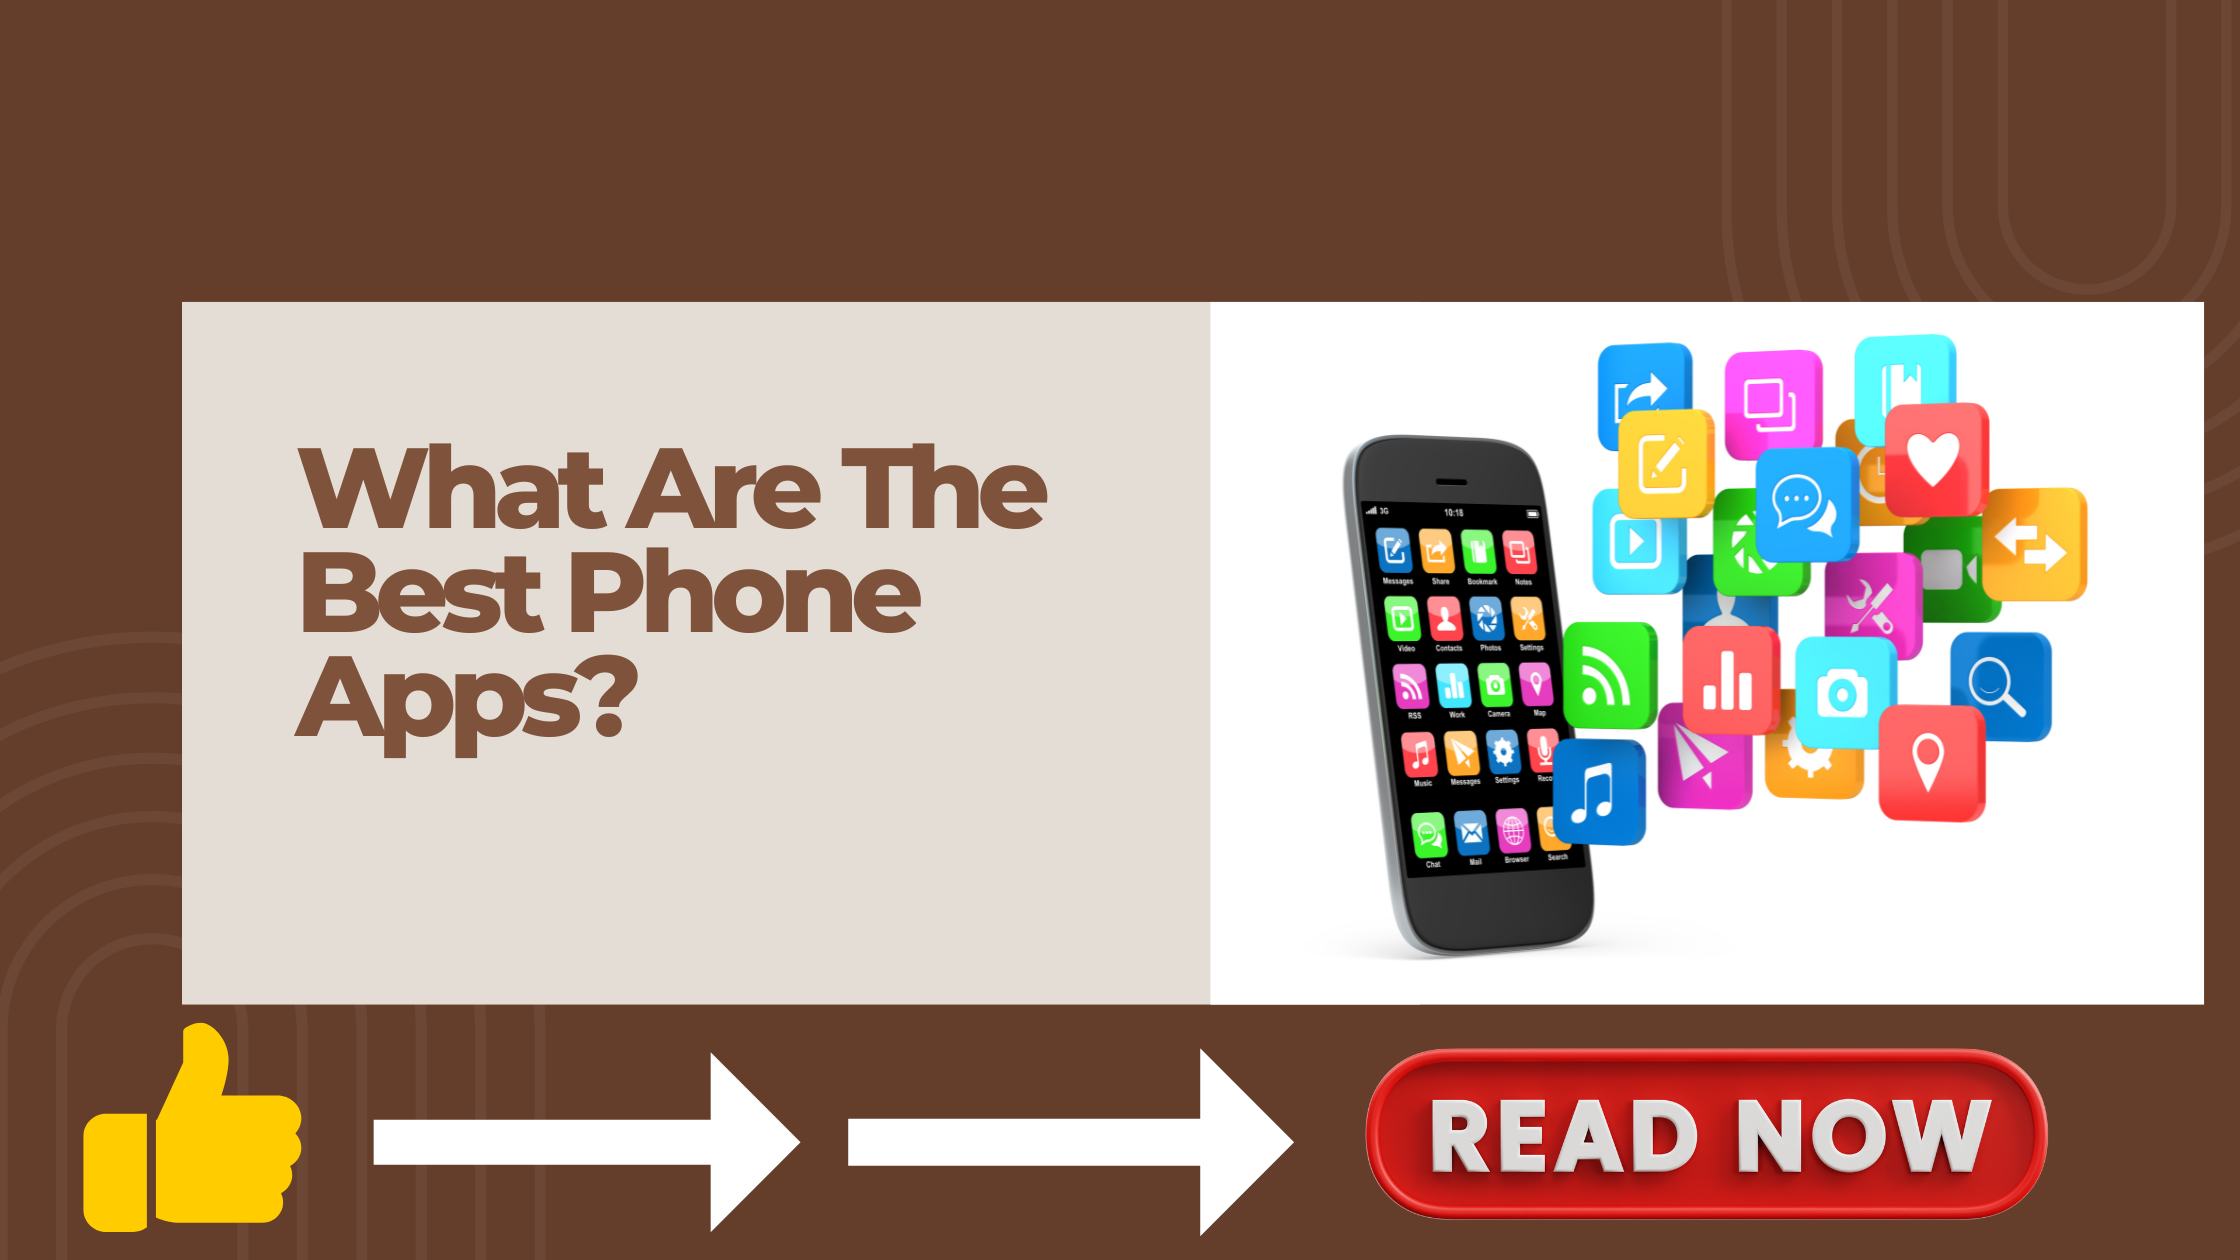 What Are The Best Phone Apps?